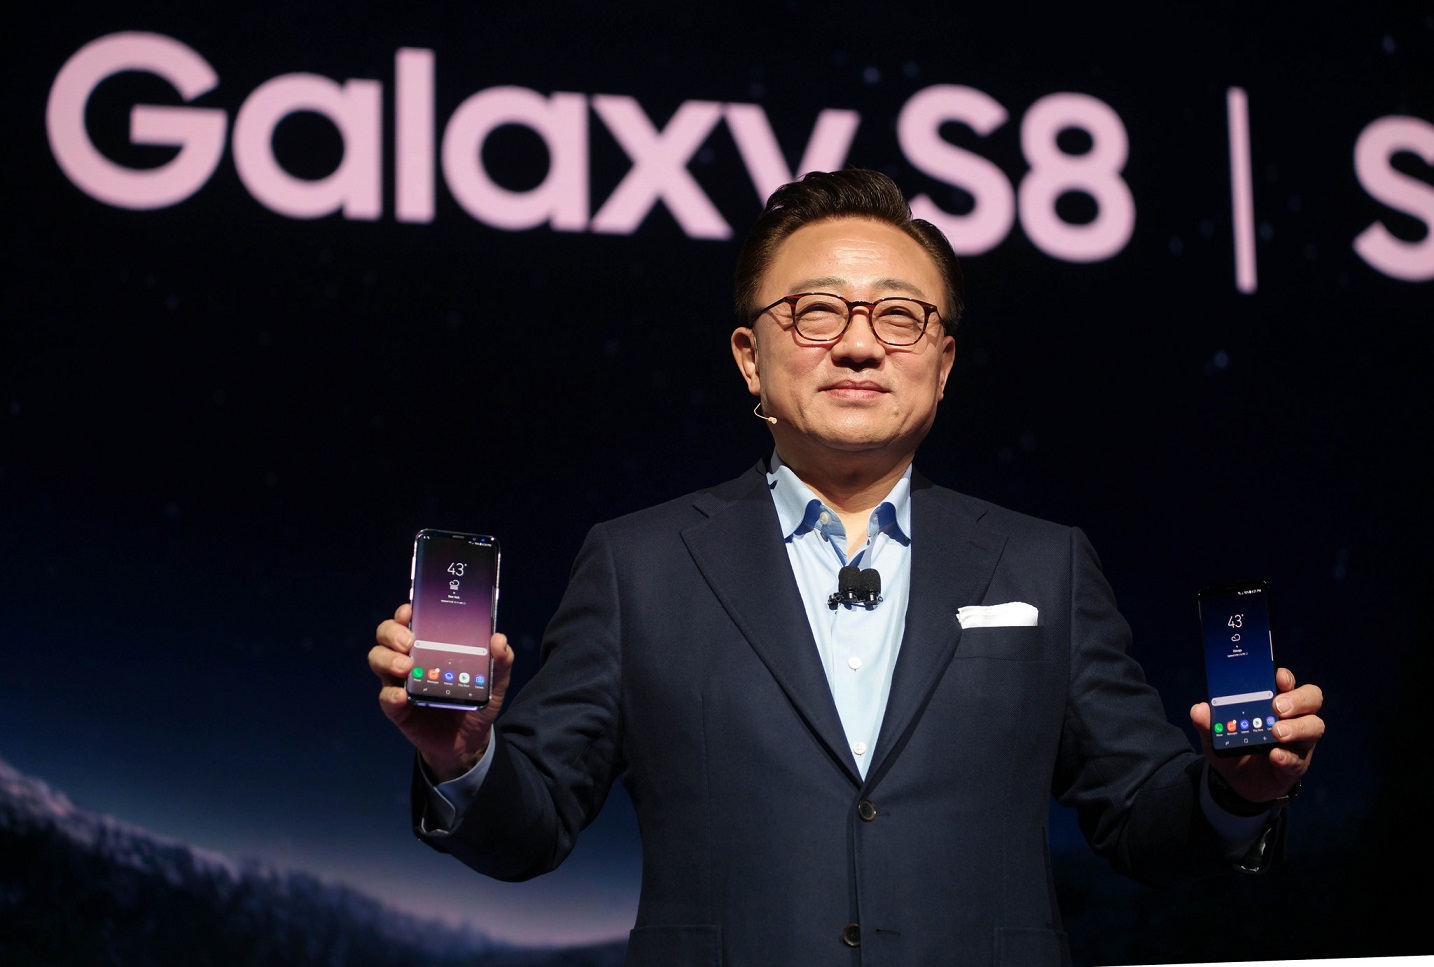 Samsung’s Galaxy S8 aims to break smartphone conventions